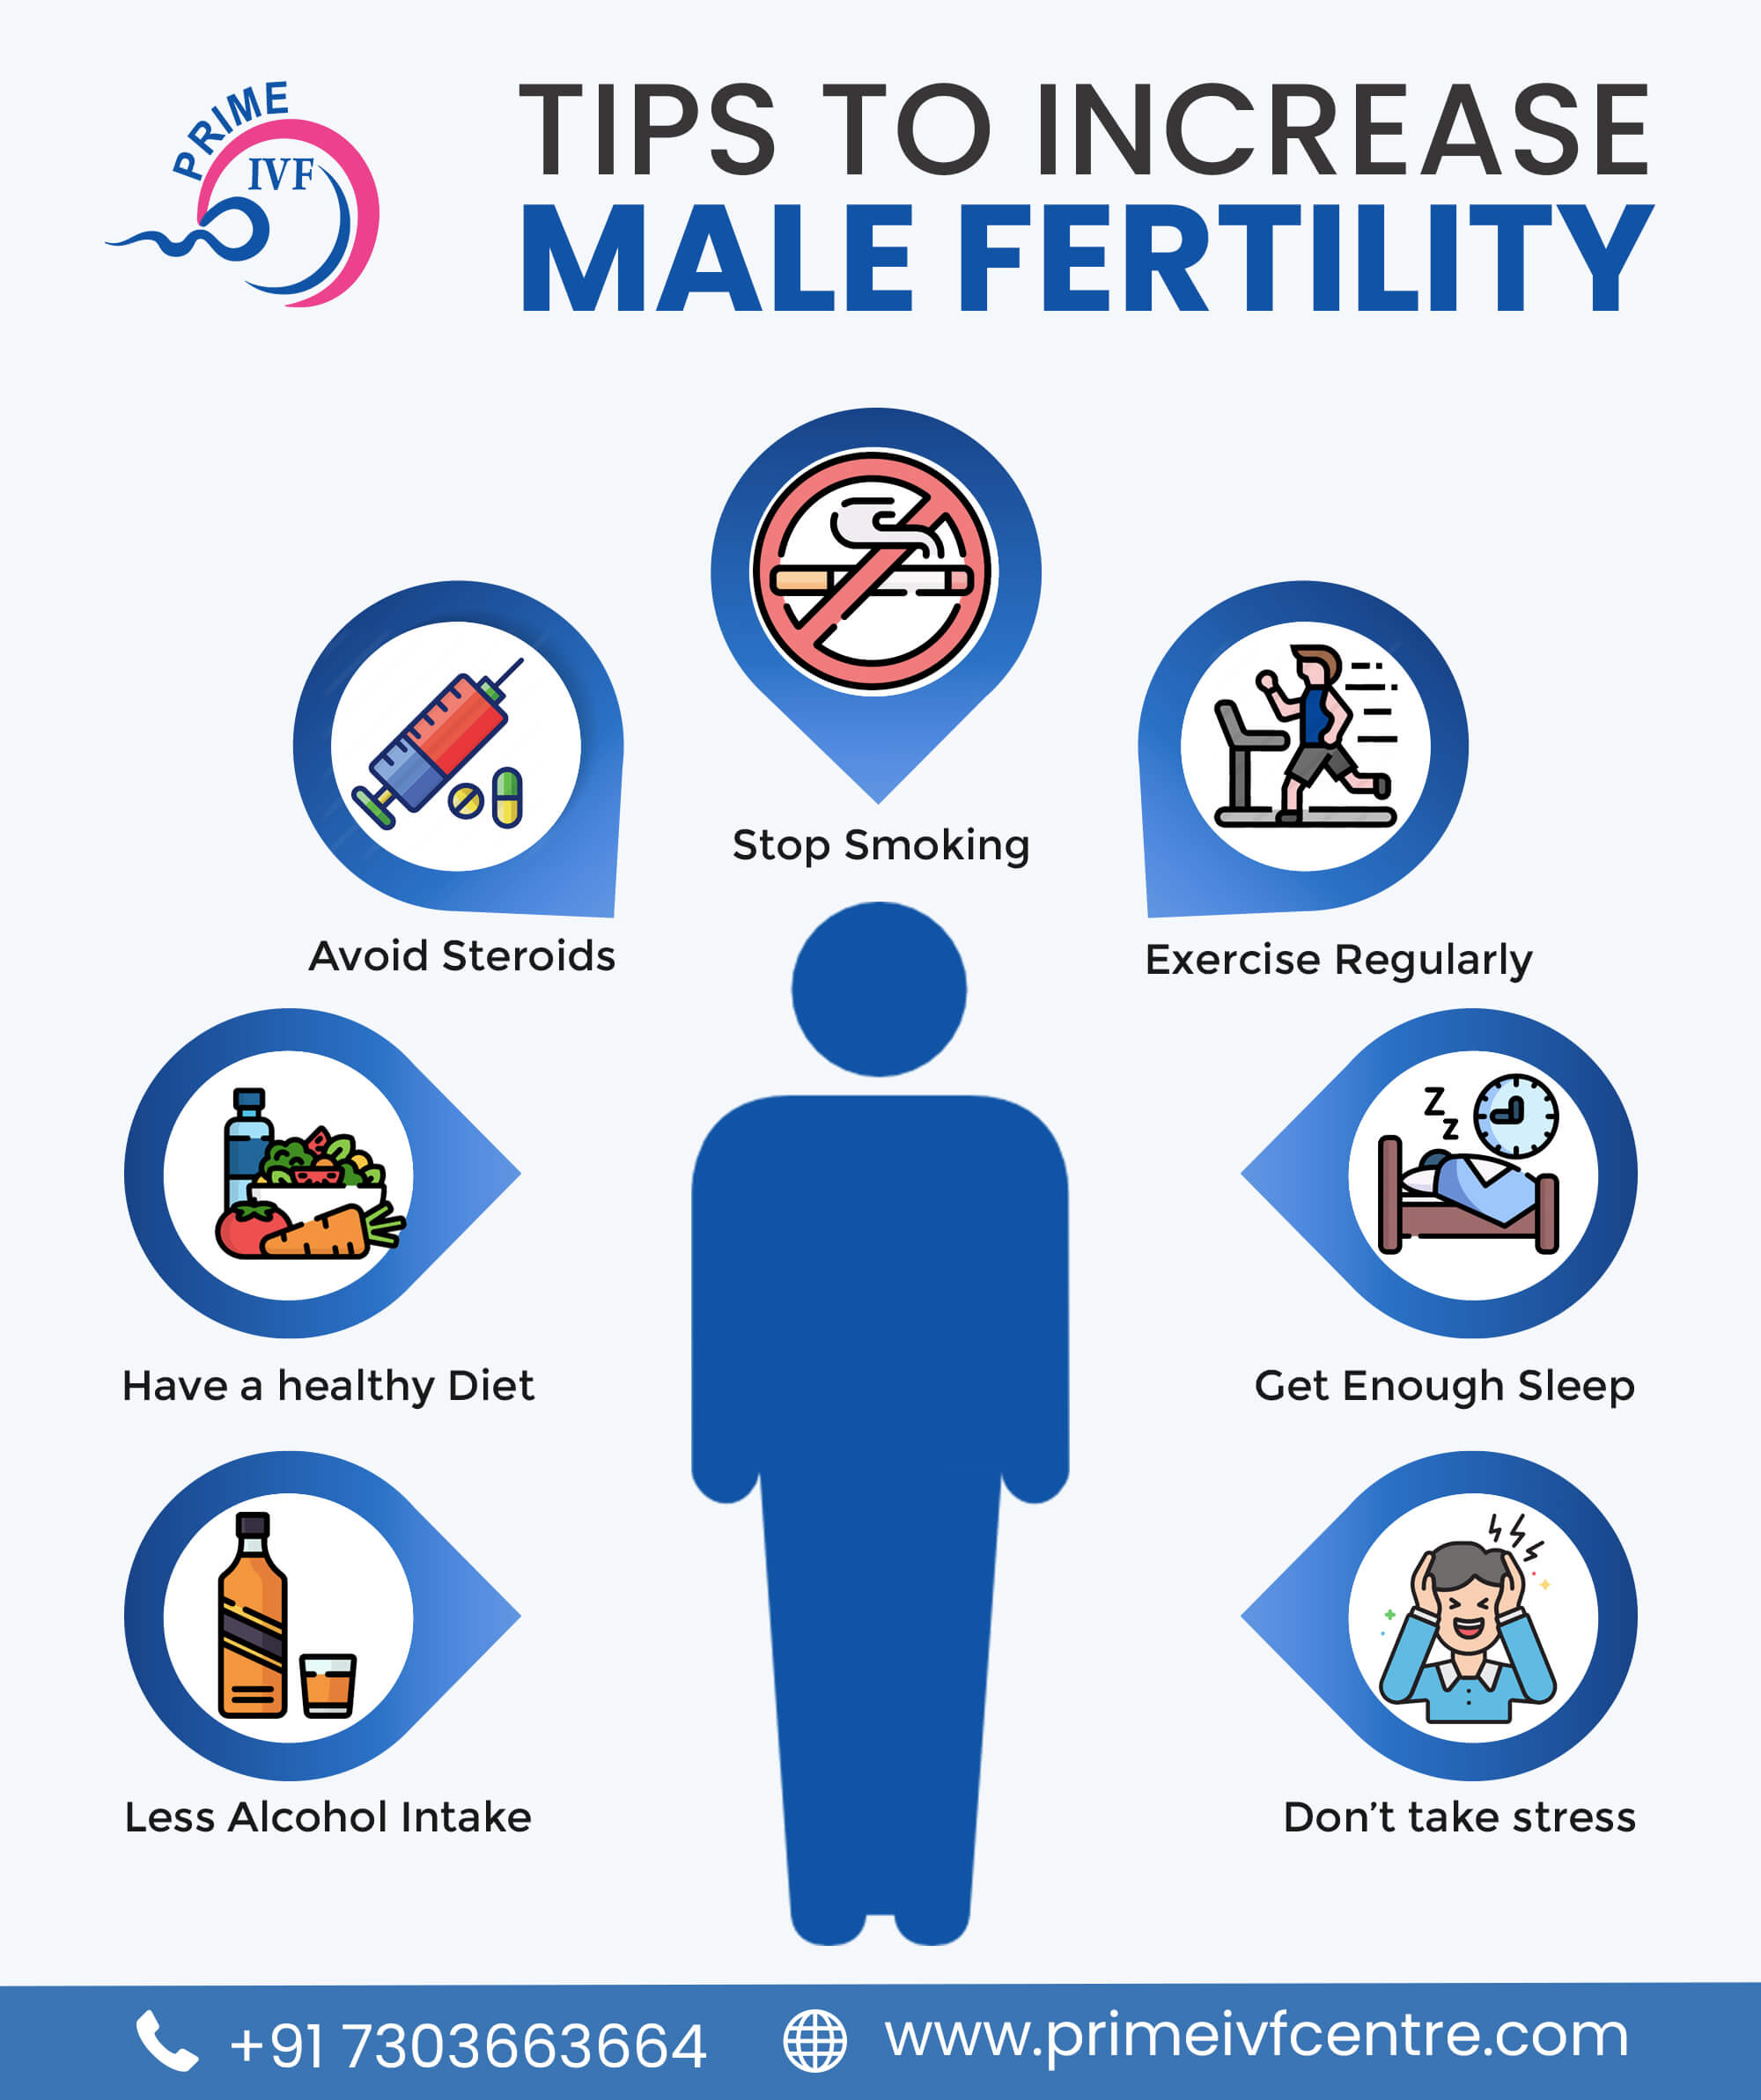 Tips to Increase Male Fertility in Covid Times